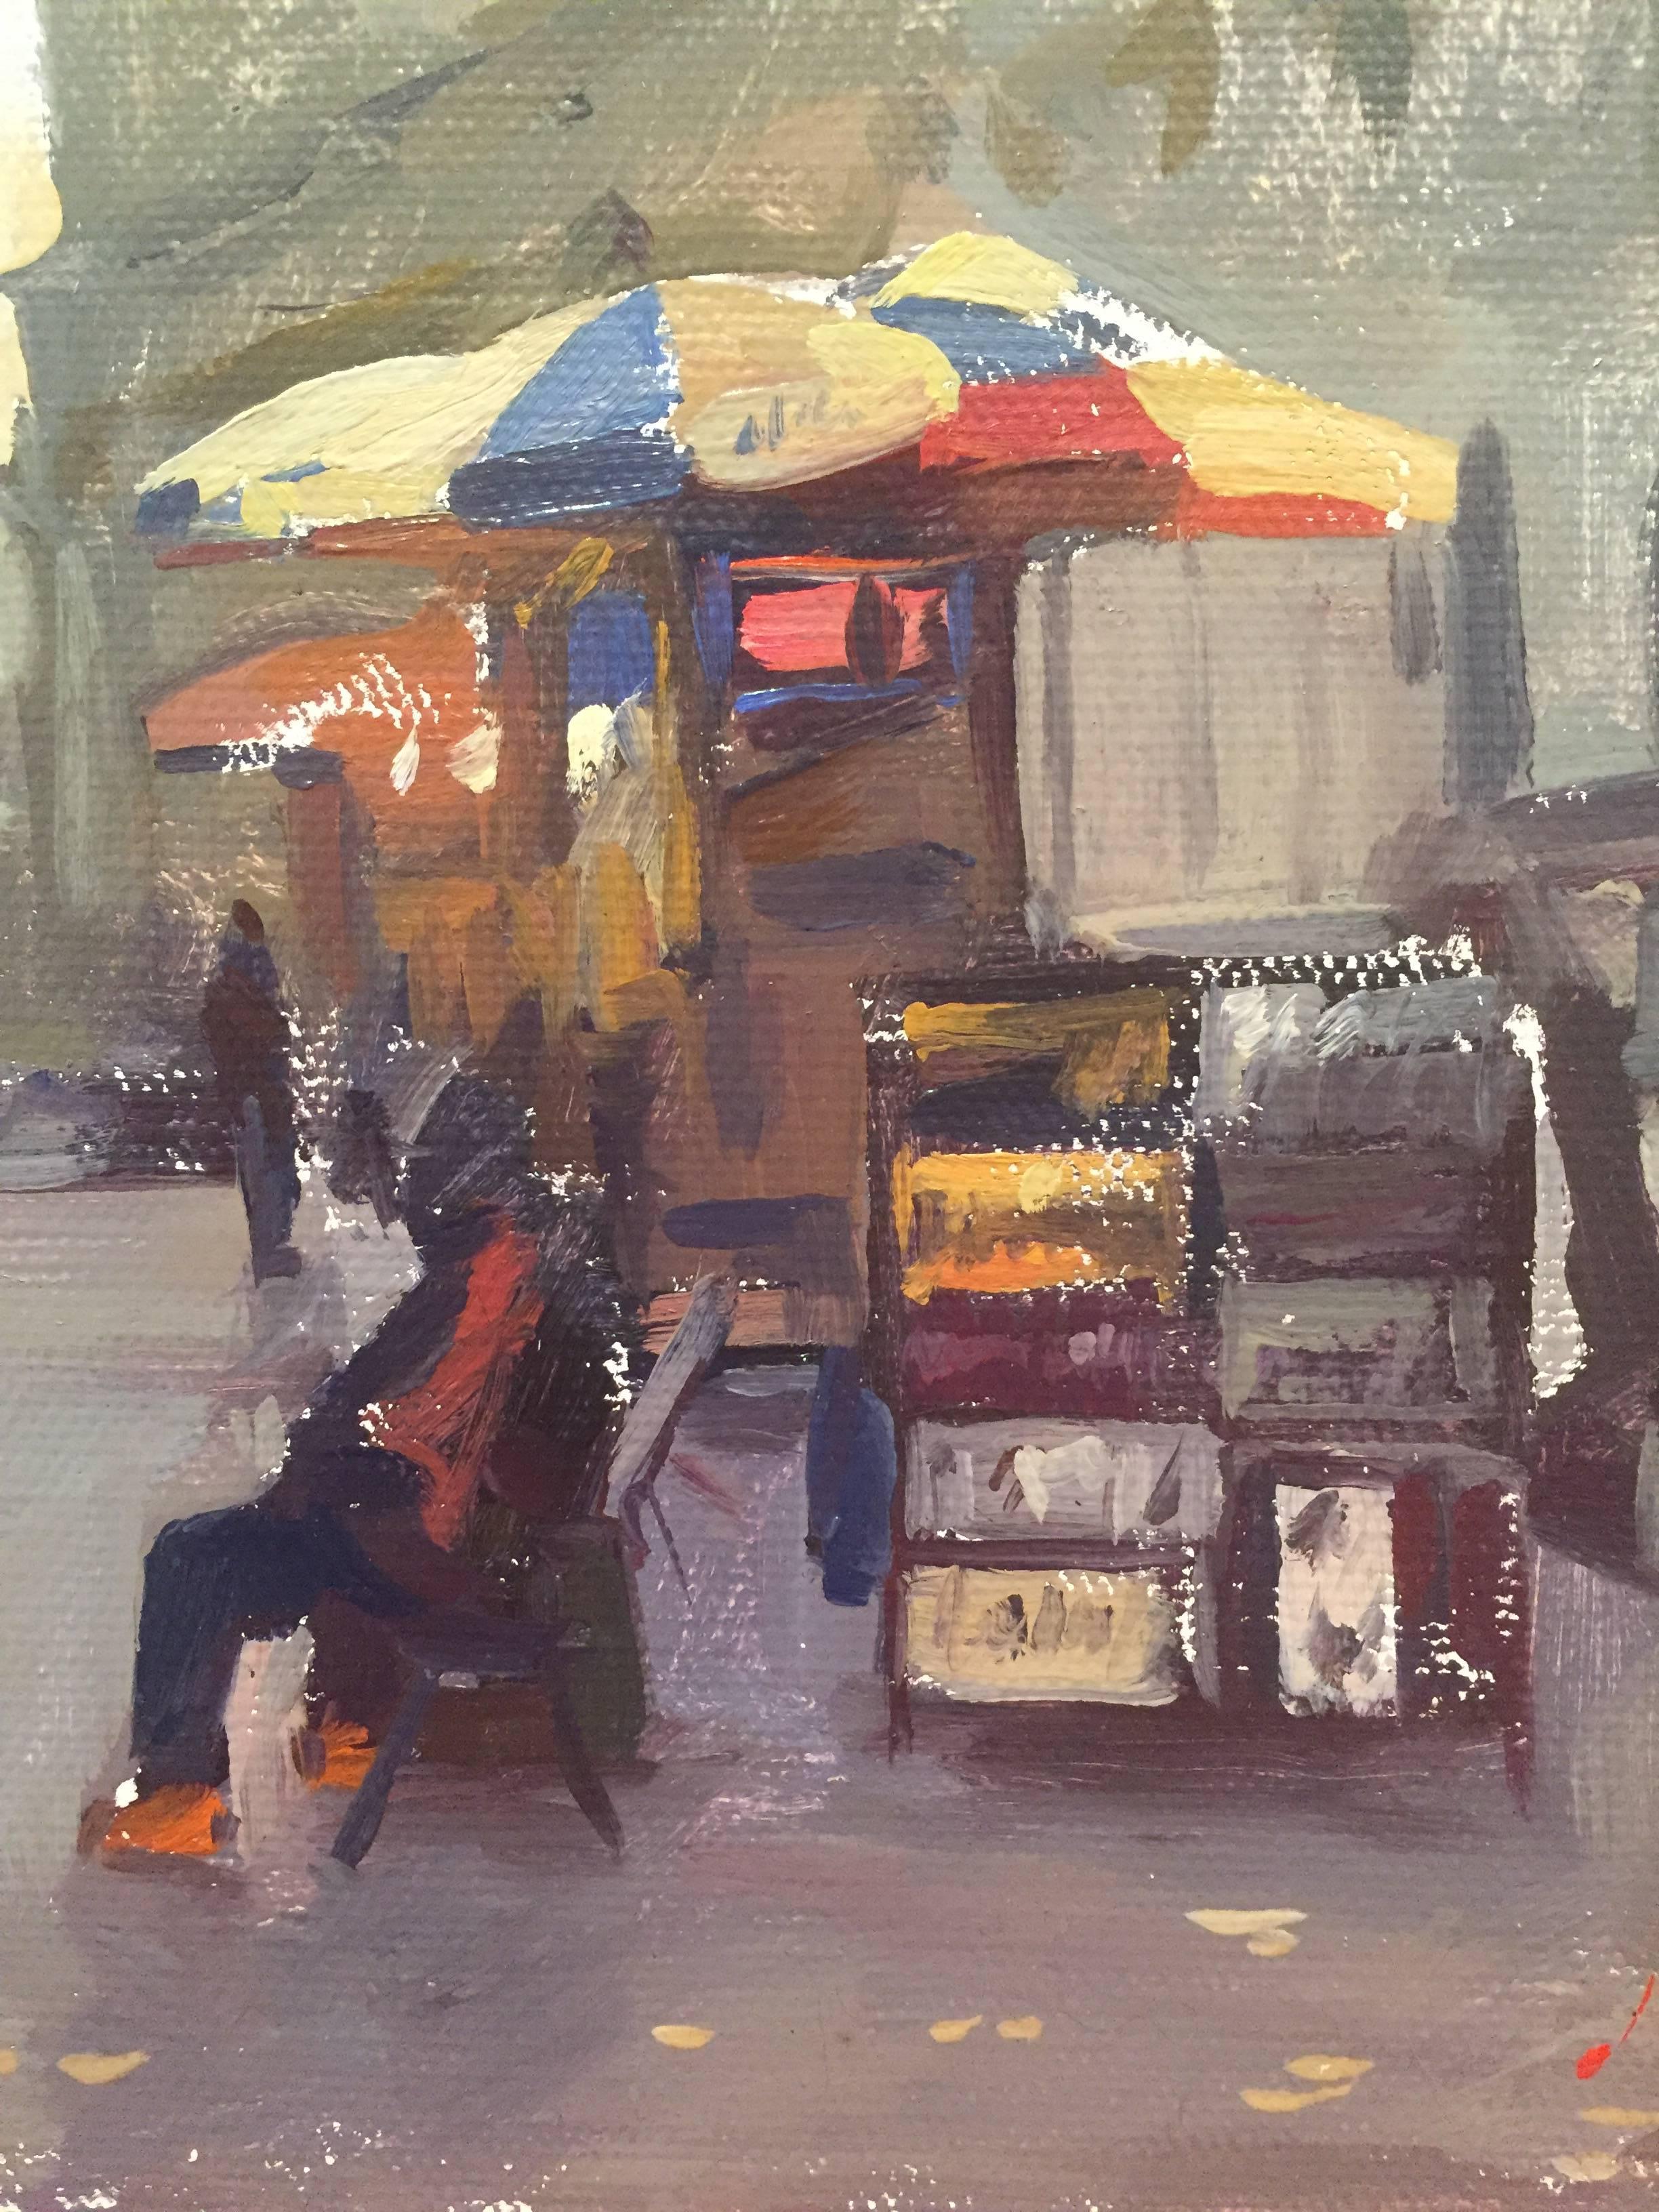 An oil painting of a New York City scene. Painted en plein air on a sidewalk in Manhattan, a figure is sitting in front of a booth of artwork underneath a colorful umbrella. Small lines of a grey-purple make up figures in the distance. A few dashes